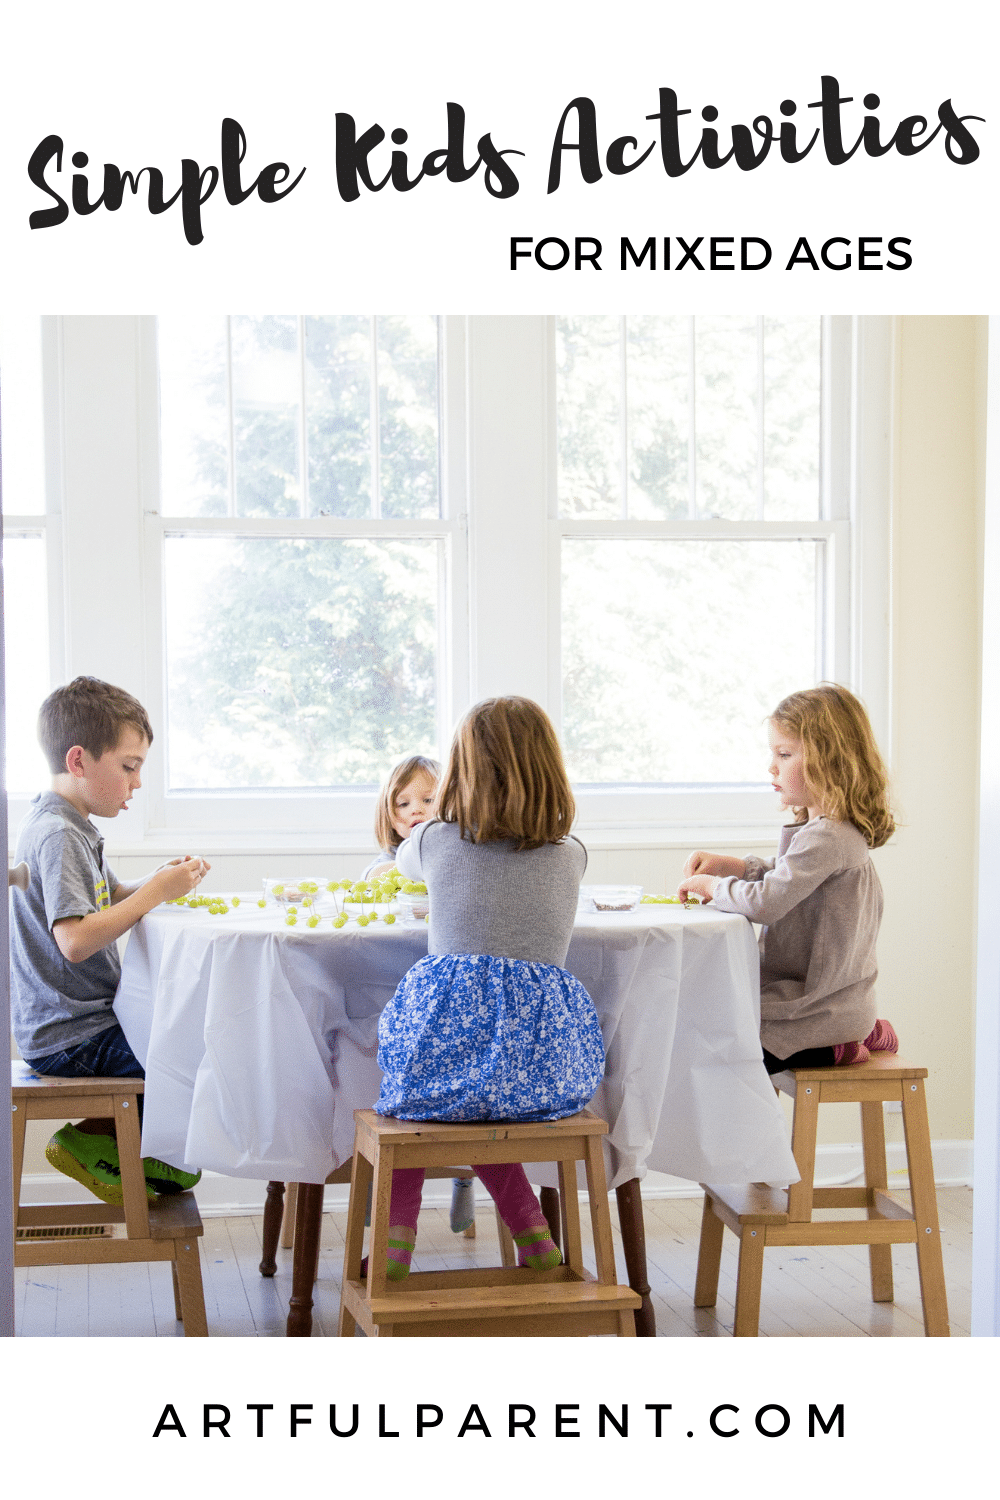 Simple Kids Activities for Mixed Ages